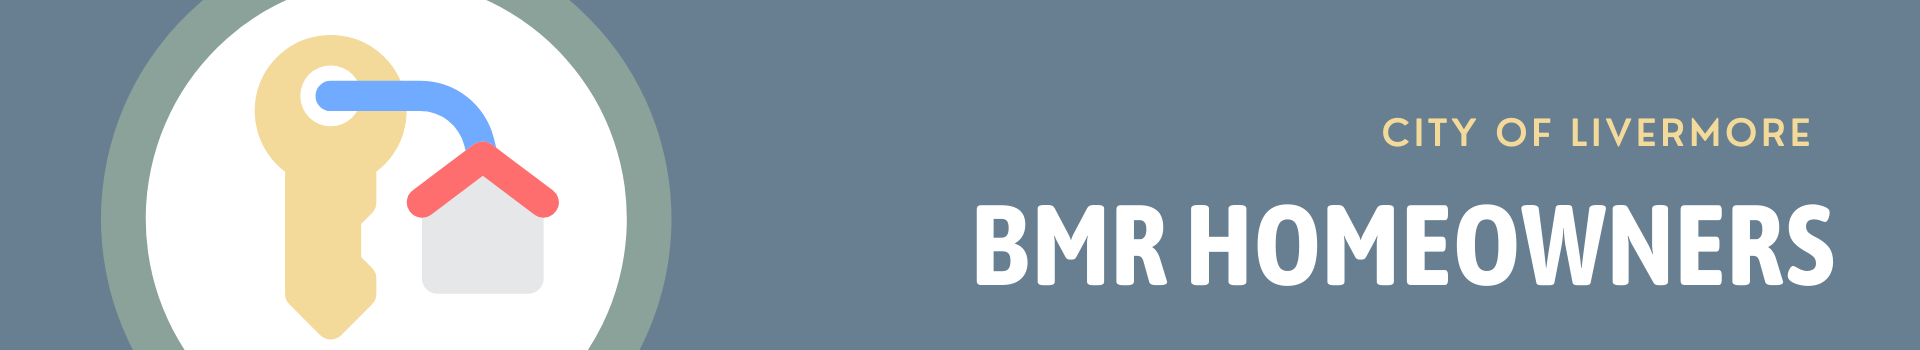 BMR Homeowners (1920 x 350 px) banner